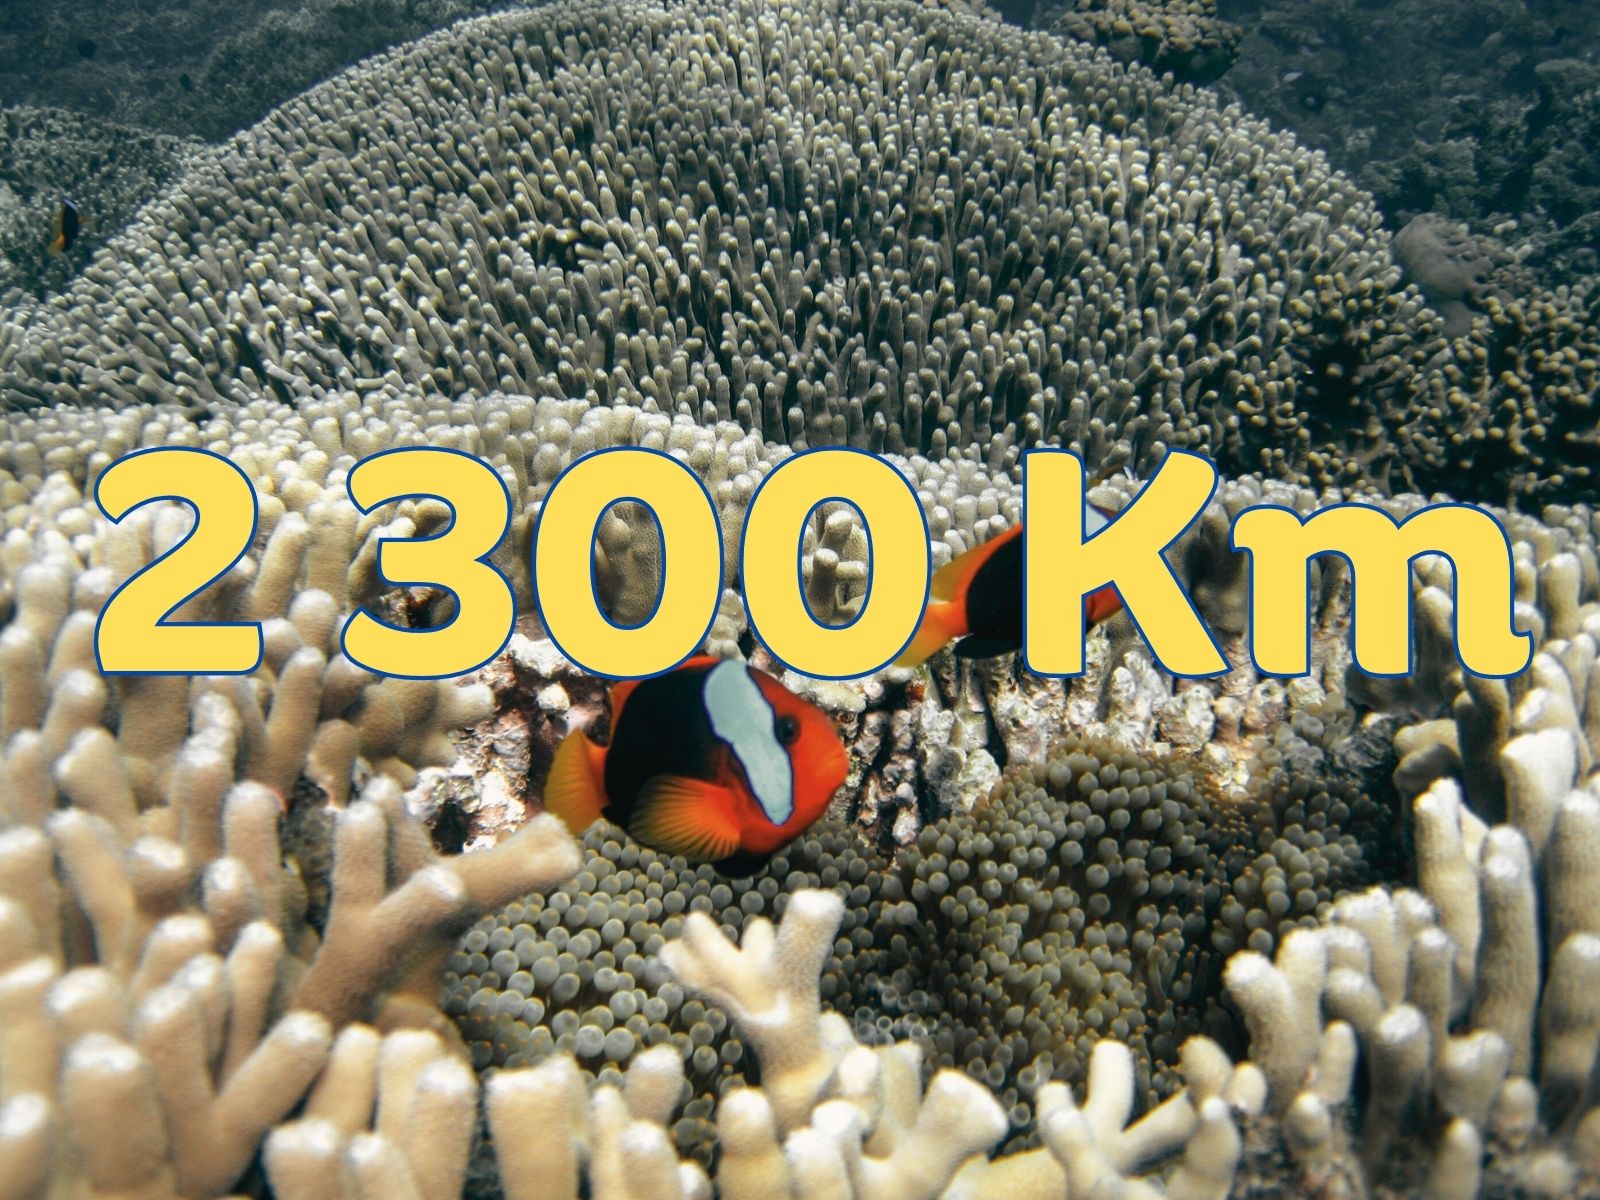 2 300 Km - The great Barrier reef